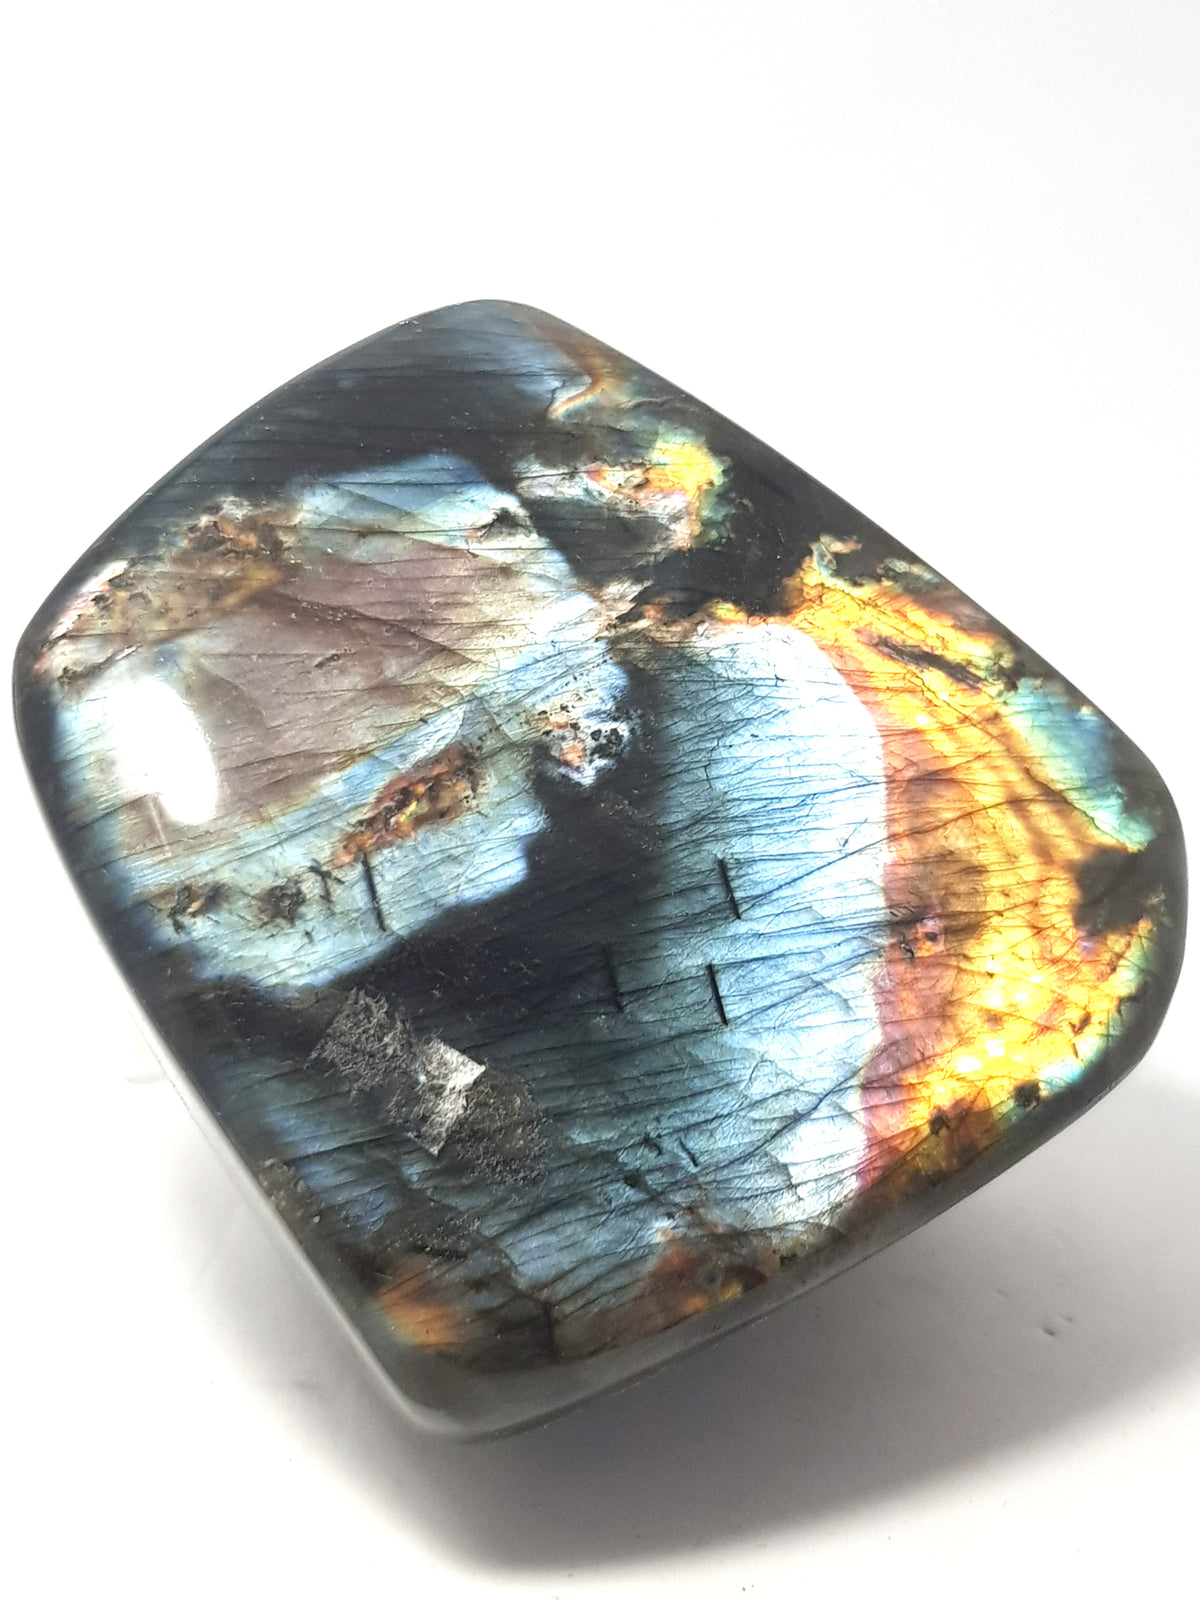 polished labradorite. several visible large crystals.. Golden and red and blue in the  right hand corner, the left hand side of the oiece is blue with a purple flash